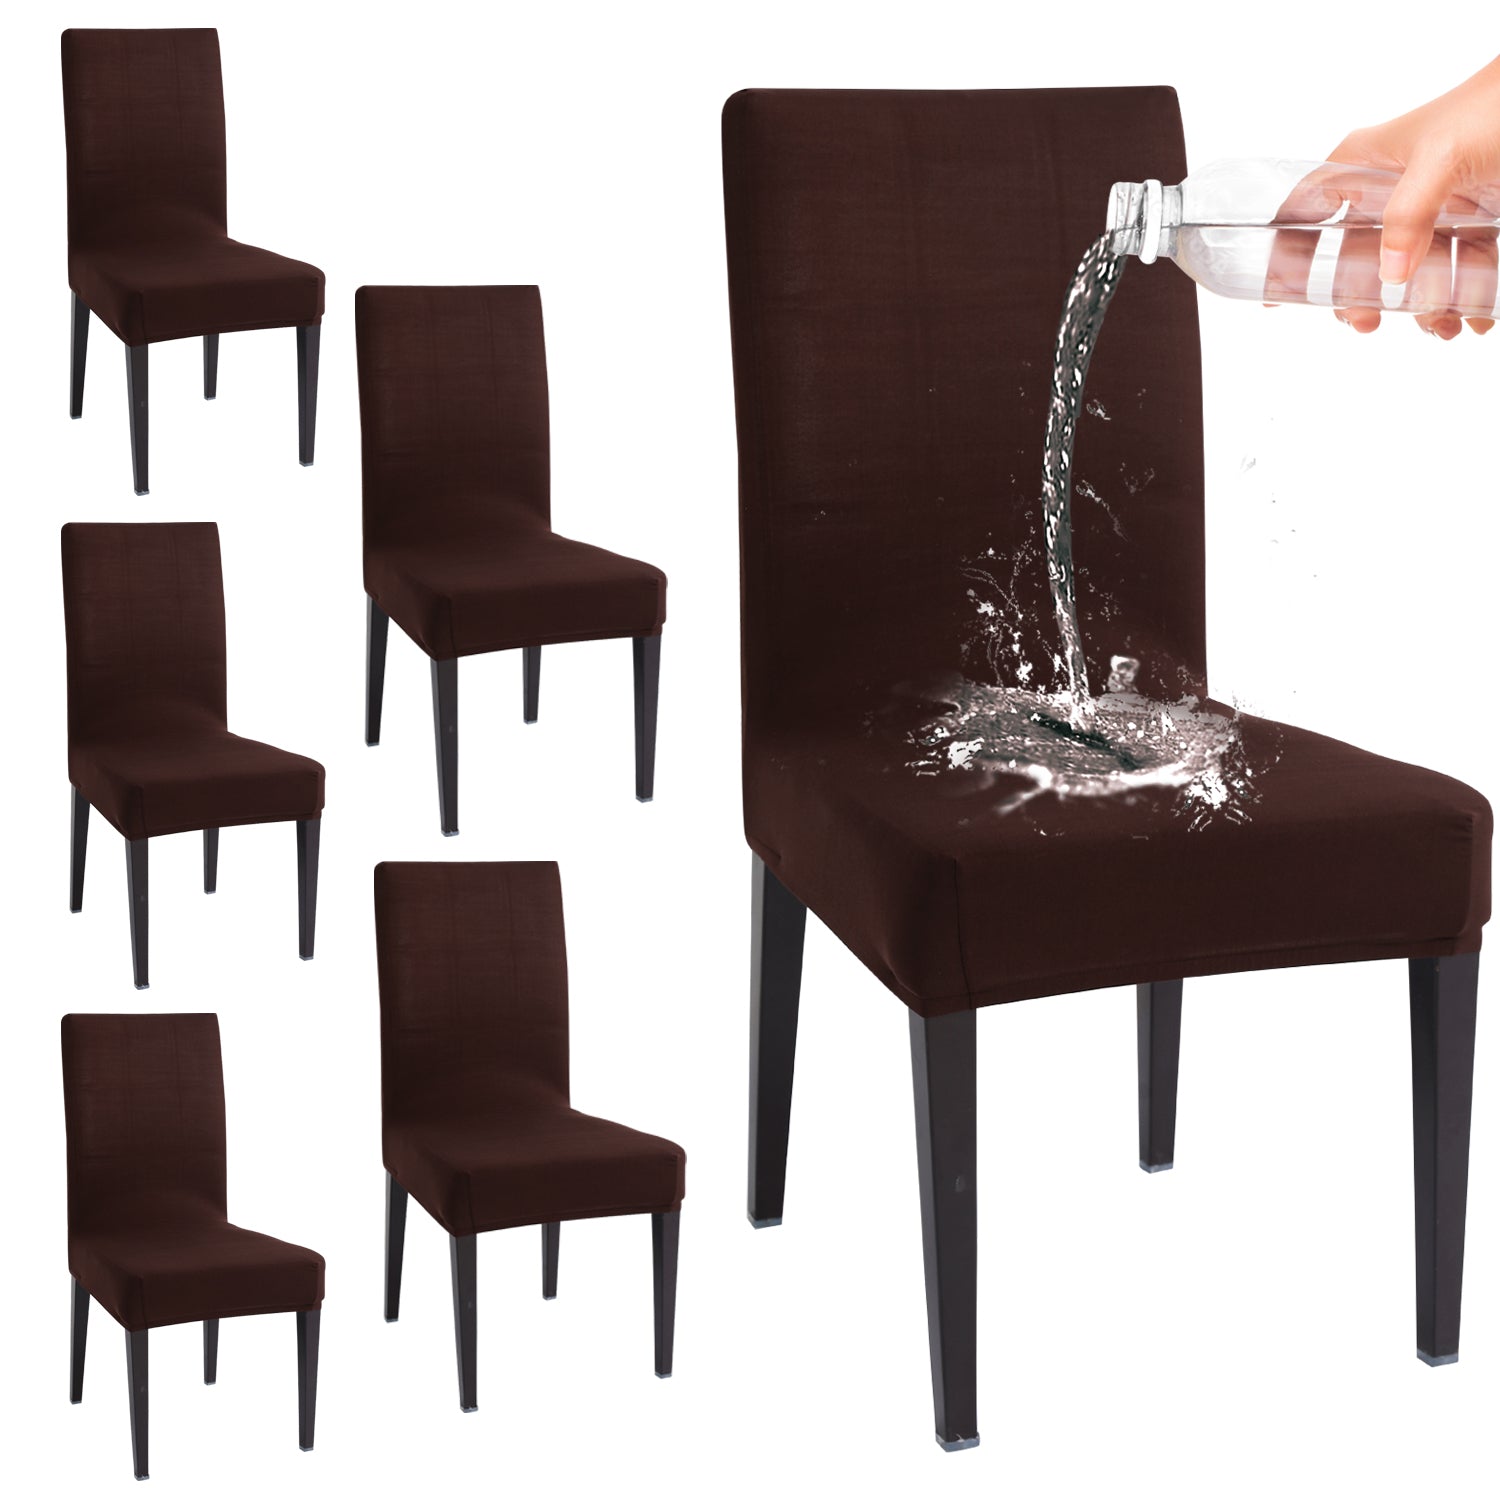 Elastic Stretchable Water Resistant Dining Chair Cover, Brown